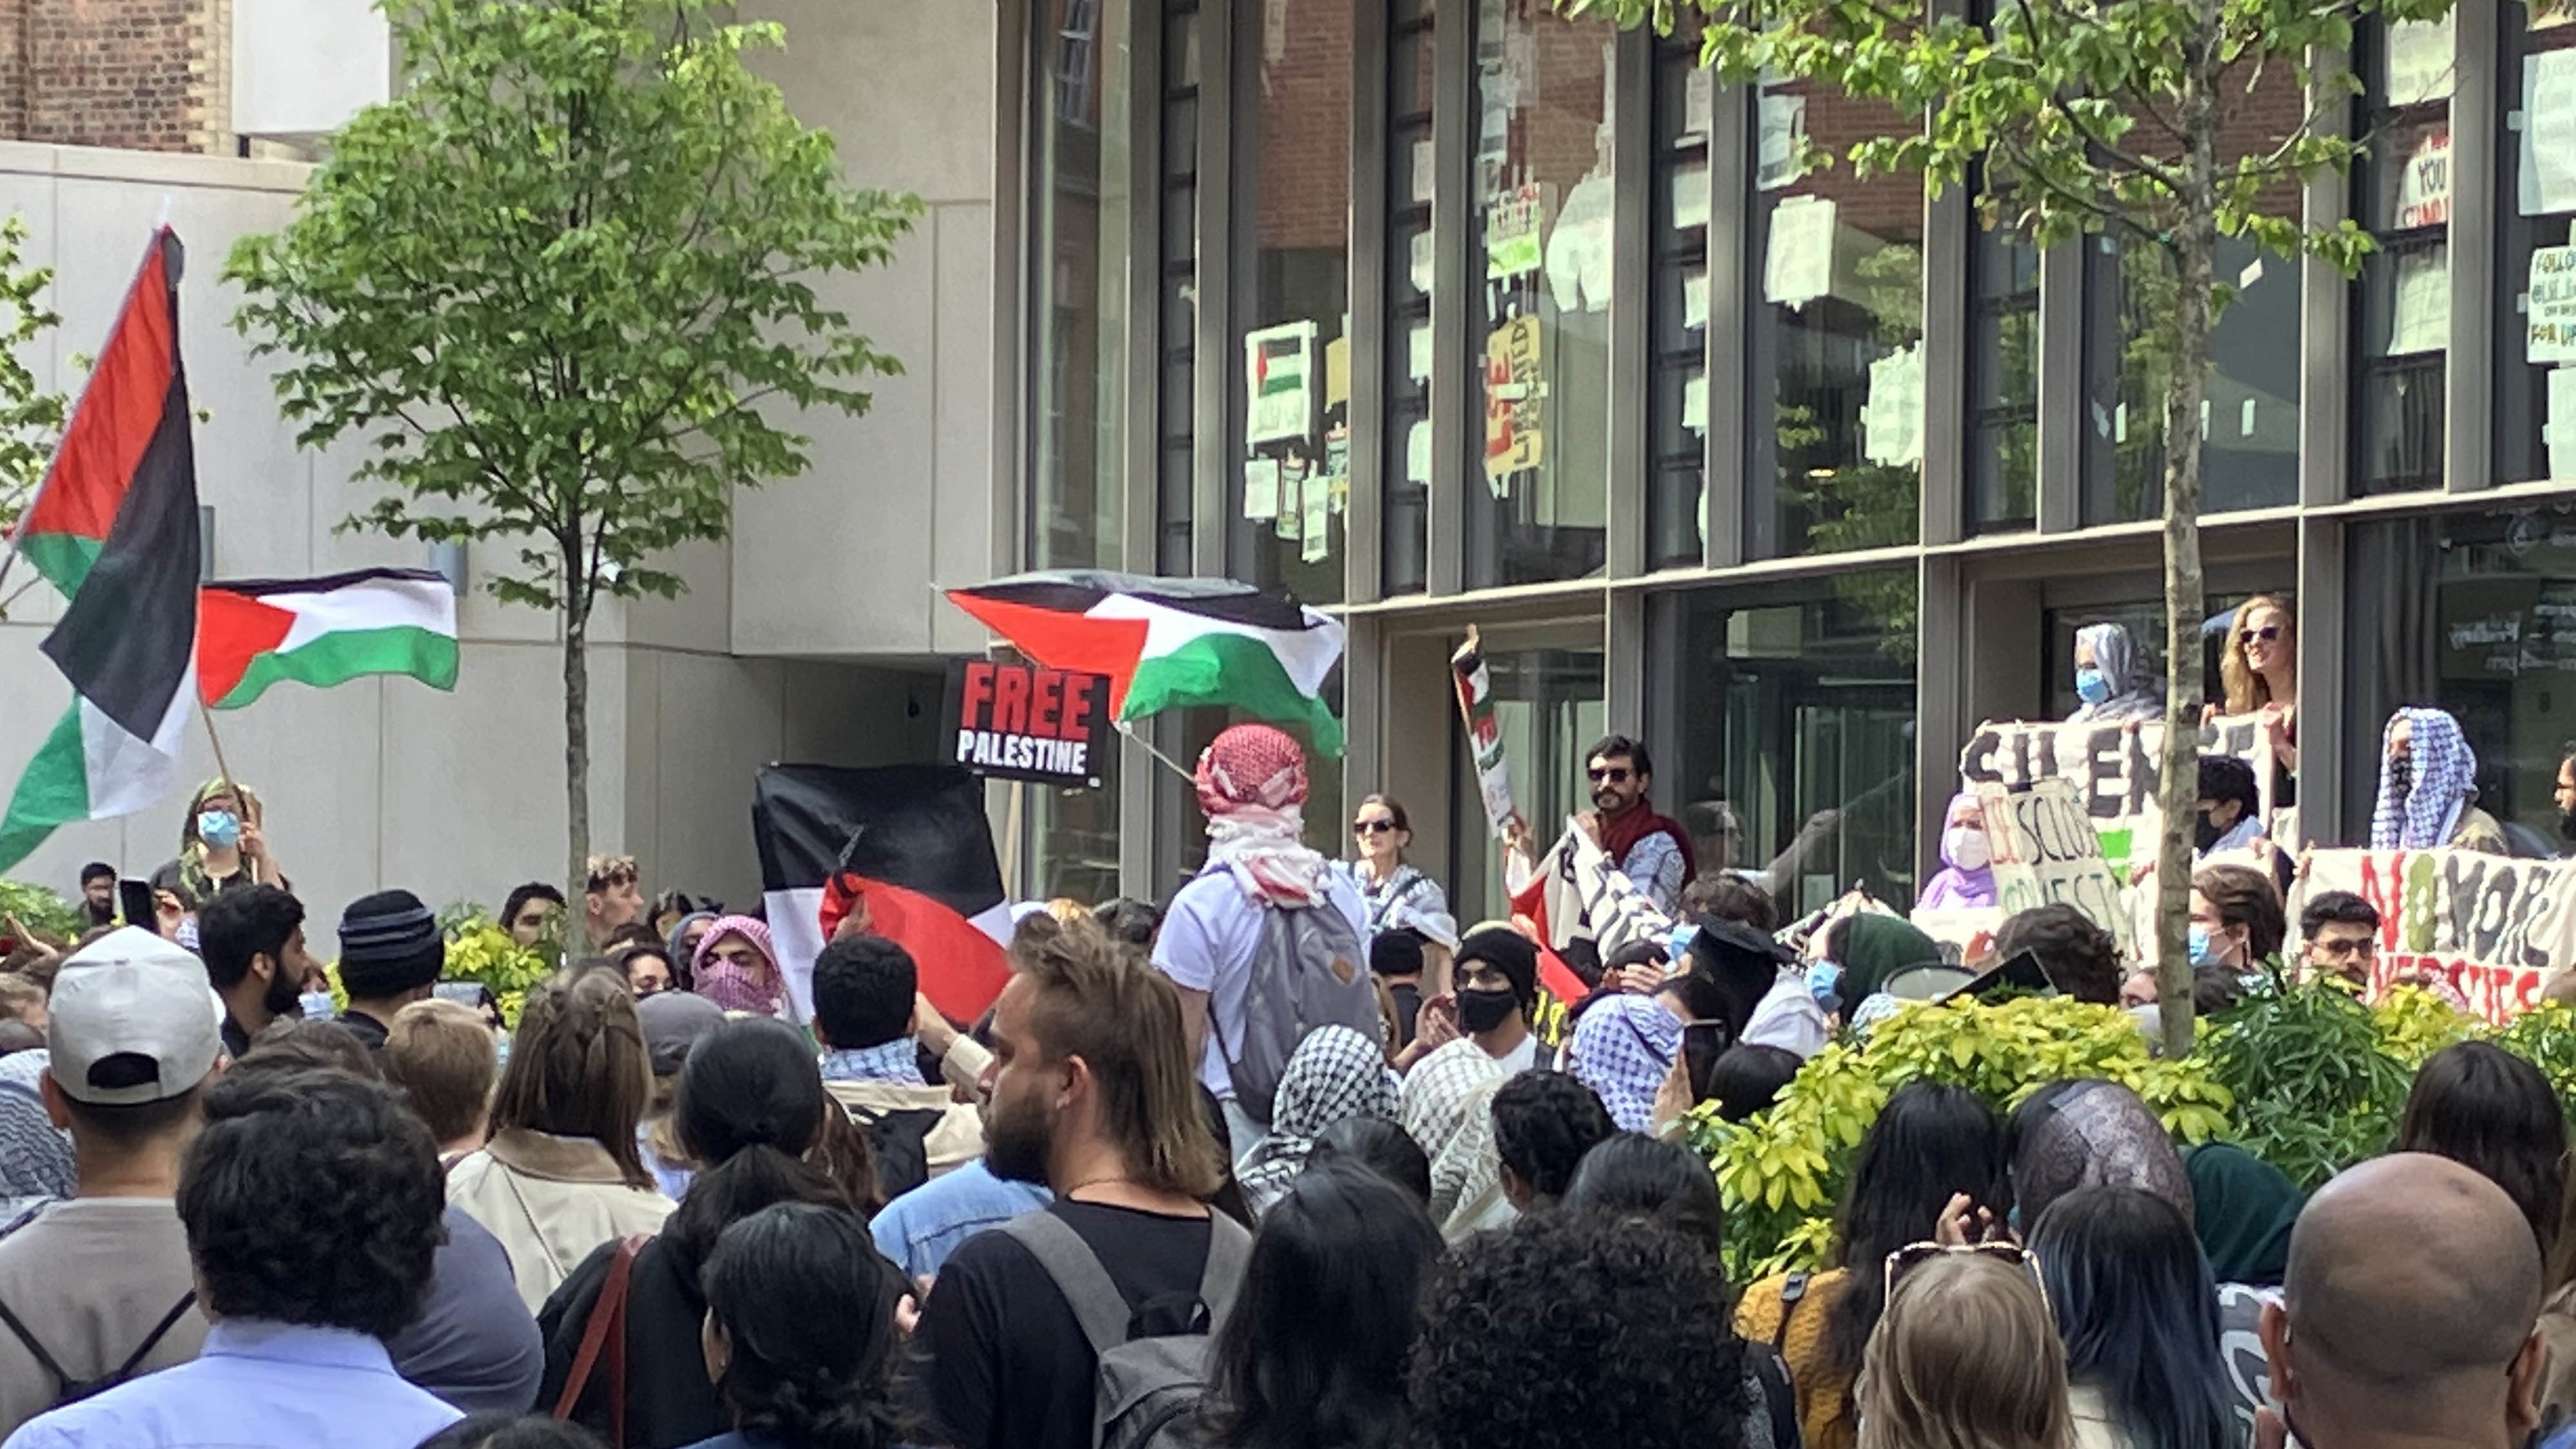 Pro Palestine protesters outside the Marshall building at the London School of Economics on June